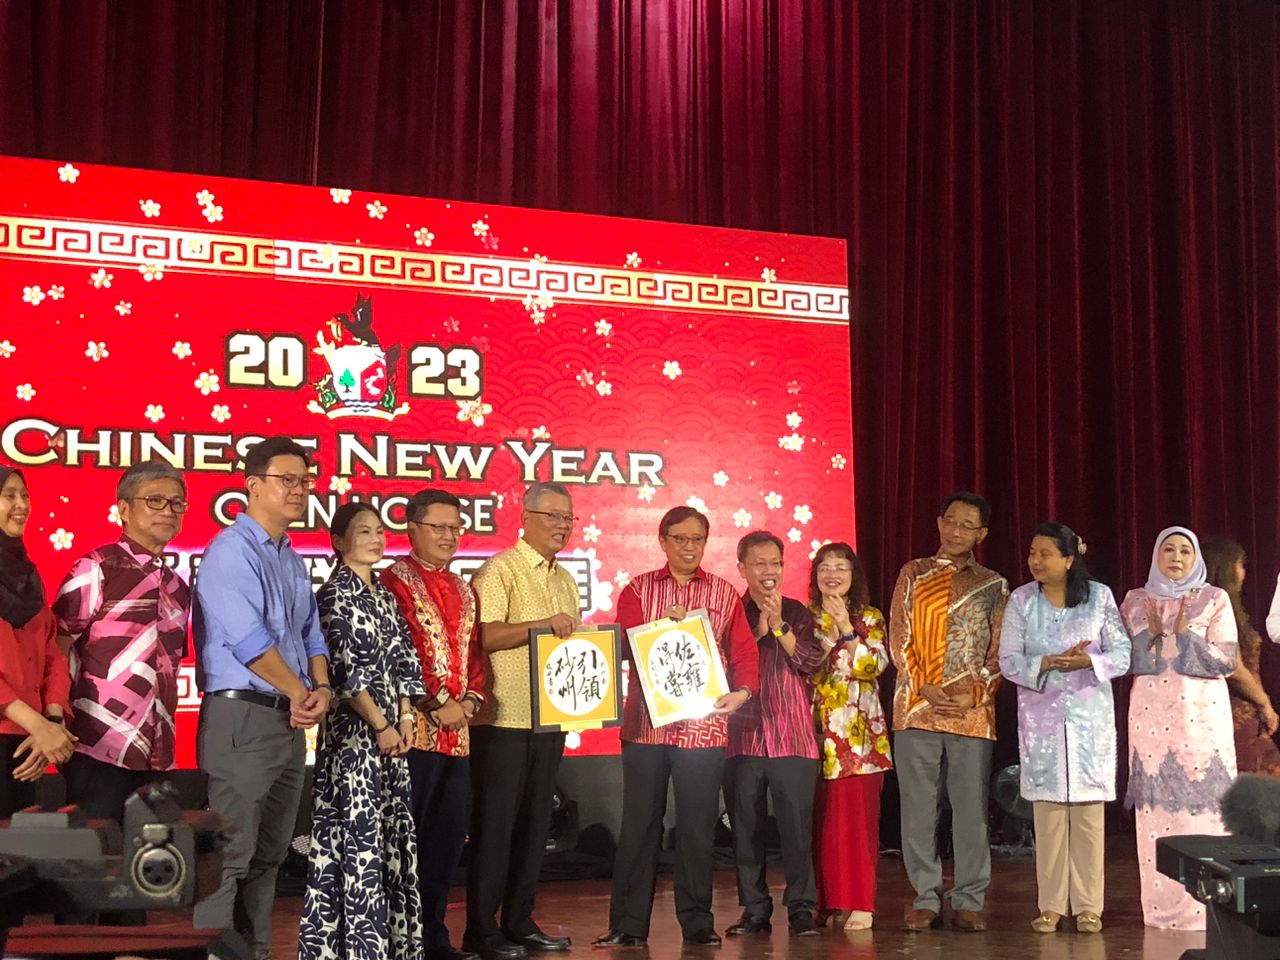 Ting (fifth left) presents a token of appreciation to Abang Johari, with (from left) Dr Annuar, Ling, Alice, Chieng, Dr Sim and his wife Datin Sri Enn Ong, Abdul Karim and his wife Datin Sri Zuraini Abdul Jabbar, and Sharifah Hasidah looking on. — Photo by Betrisianini Bakit